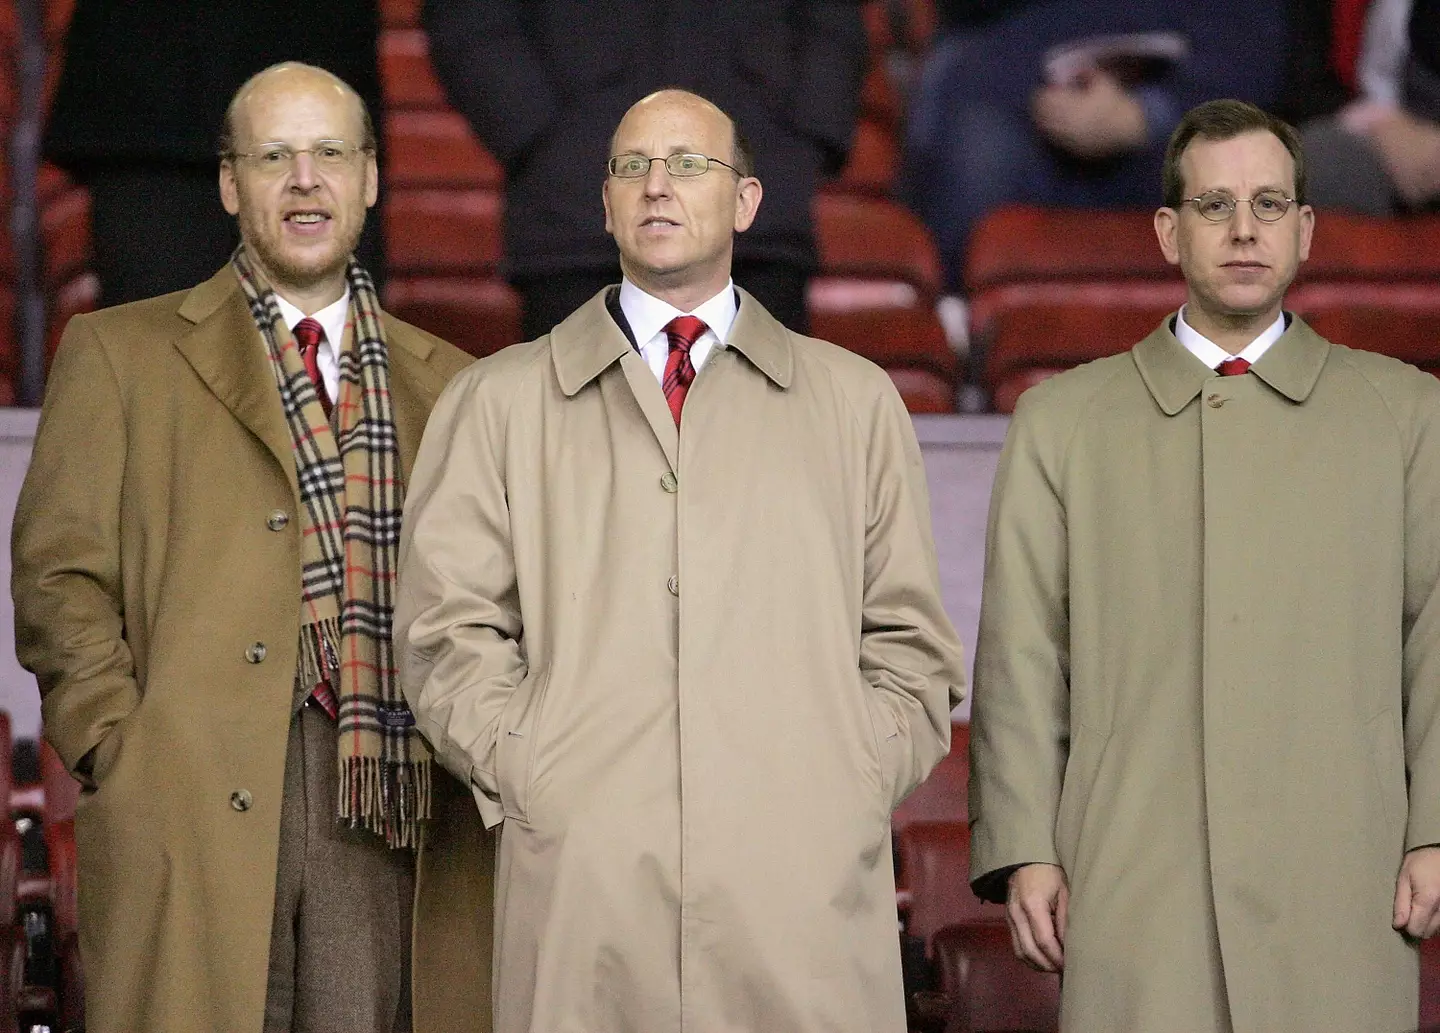 The Glazers are reportedly looking for £10 billion to sell Manchester United. Image: Getty